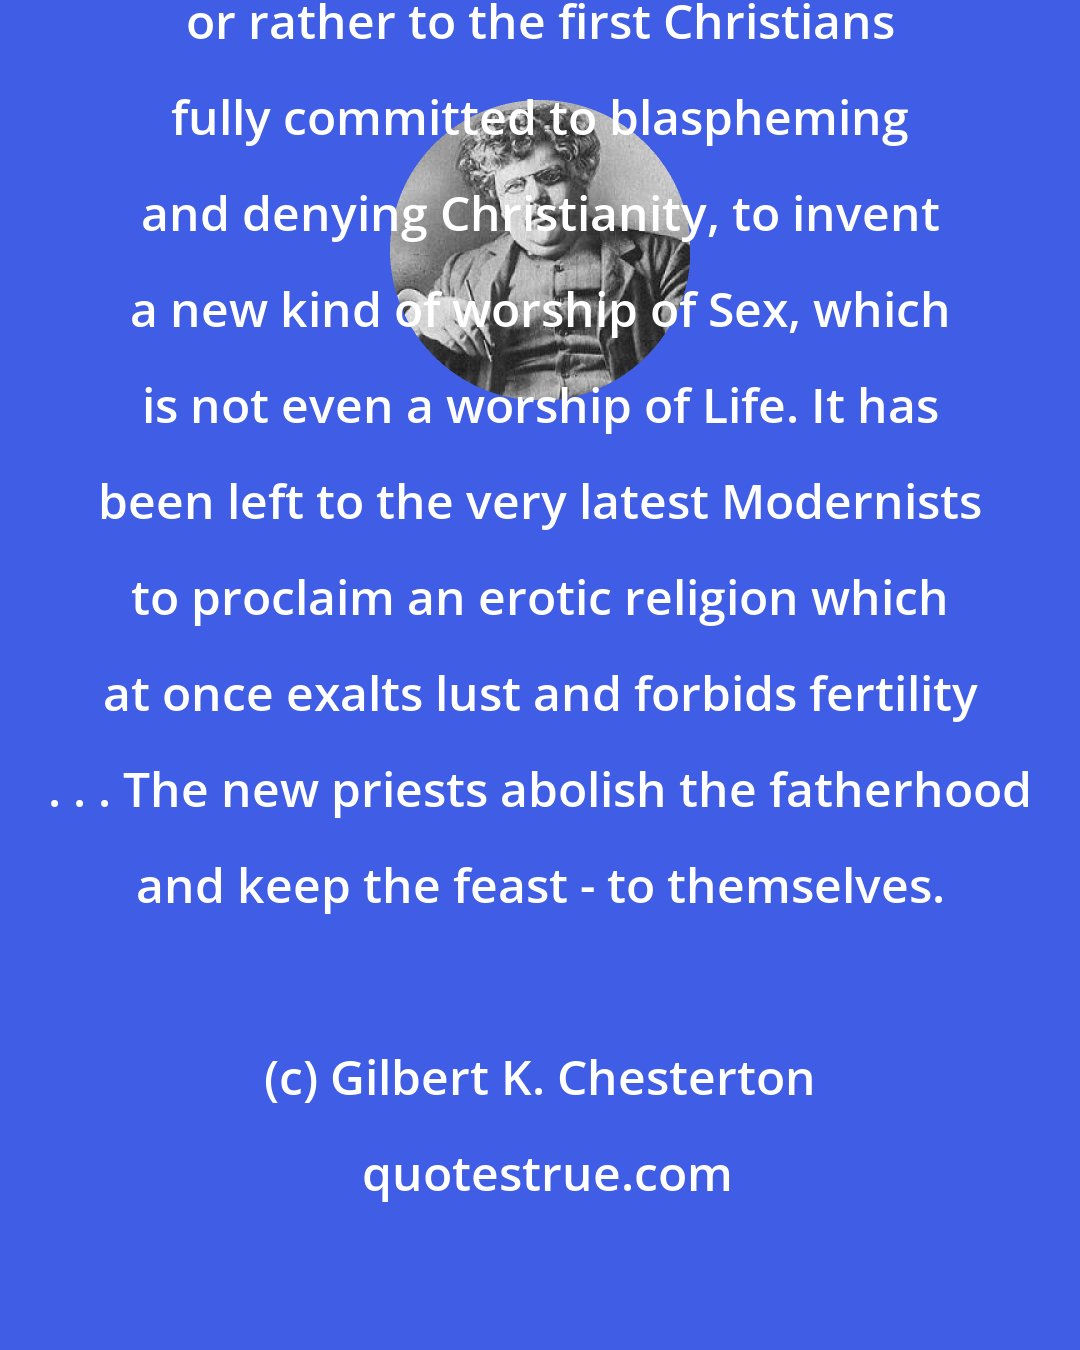 Gilbert K. Chesterton: It has been left to the last Christians, or rather to the first Christians fully committed to blaspheming and denying Christianity, to invent a new kind of worship of Sex, which is not even a worship of Life. It has been left to the very latest Modernists to proclaim an erotic religion which at once exalts lust and forbids fertility . . . The new priests abolish the fatherhood and keep the feast - to themselves.